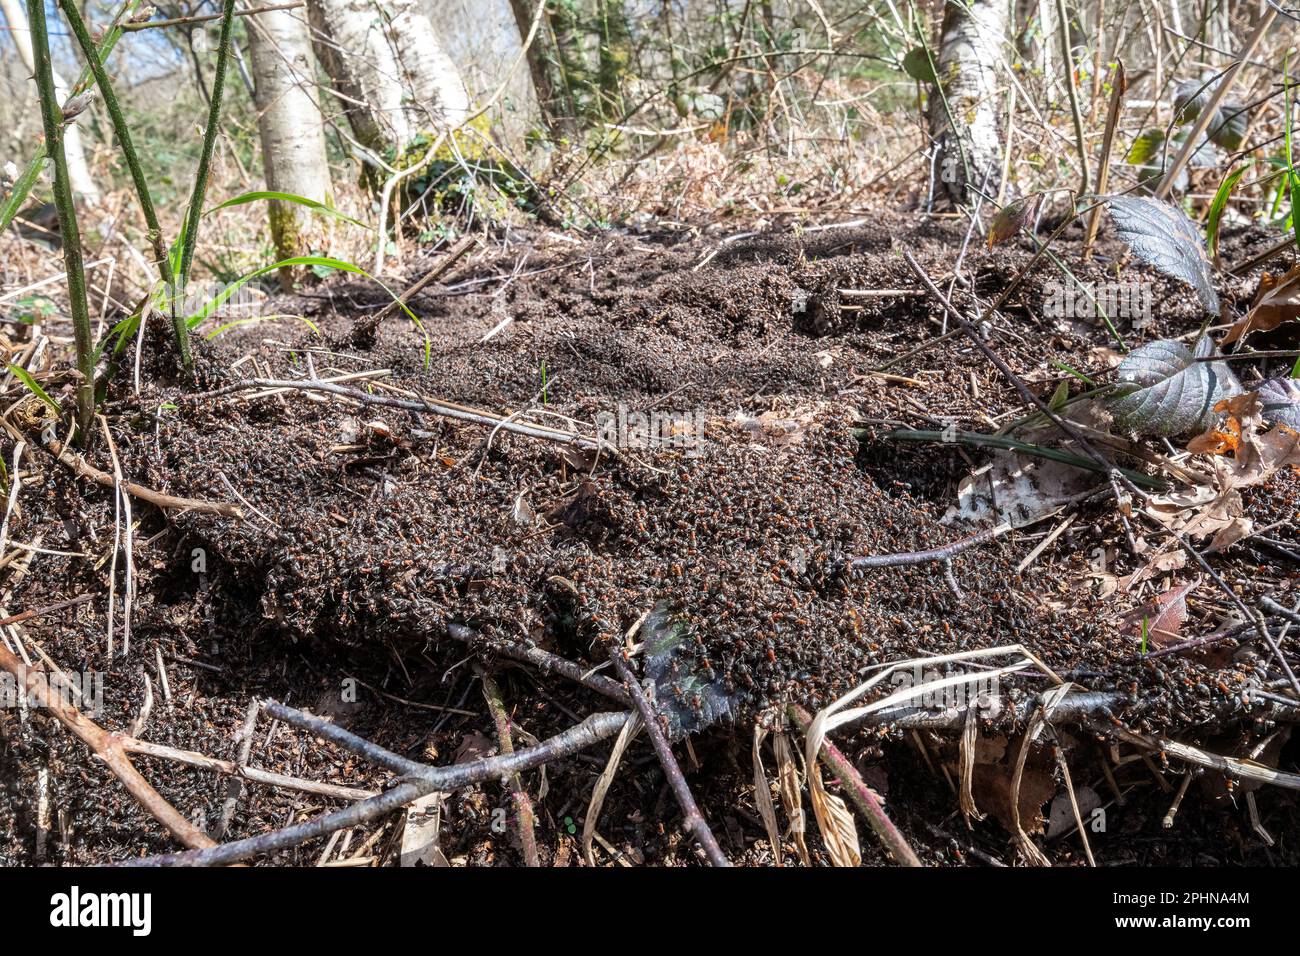 Colony of Southern wood ants (Formica rufa), swarming behaviour on top of the nest after emerging from hibernation during Spring, England, UK. Stock Photo